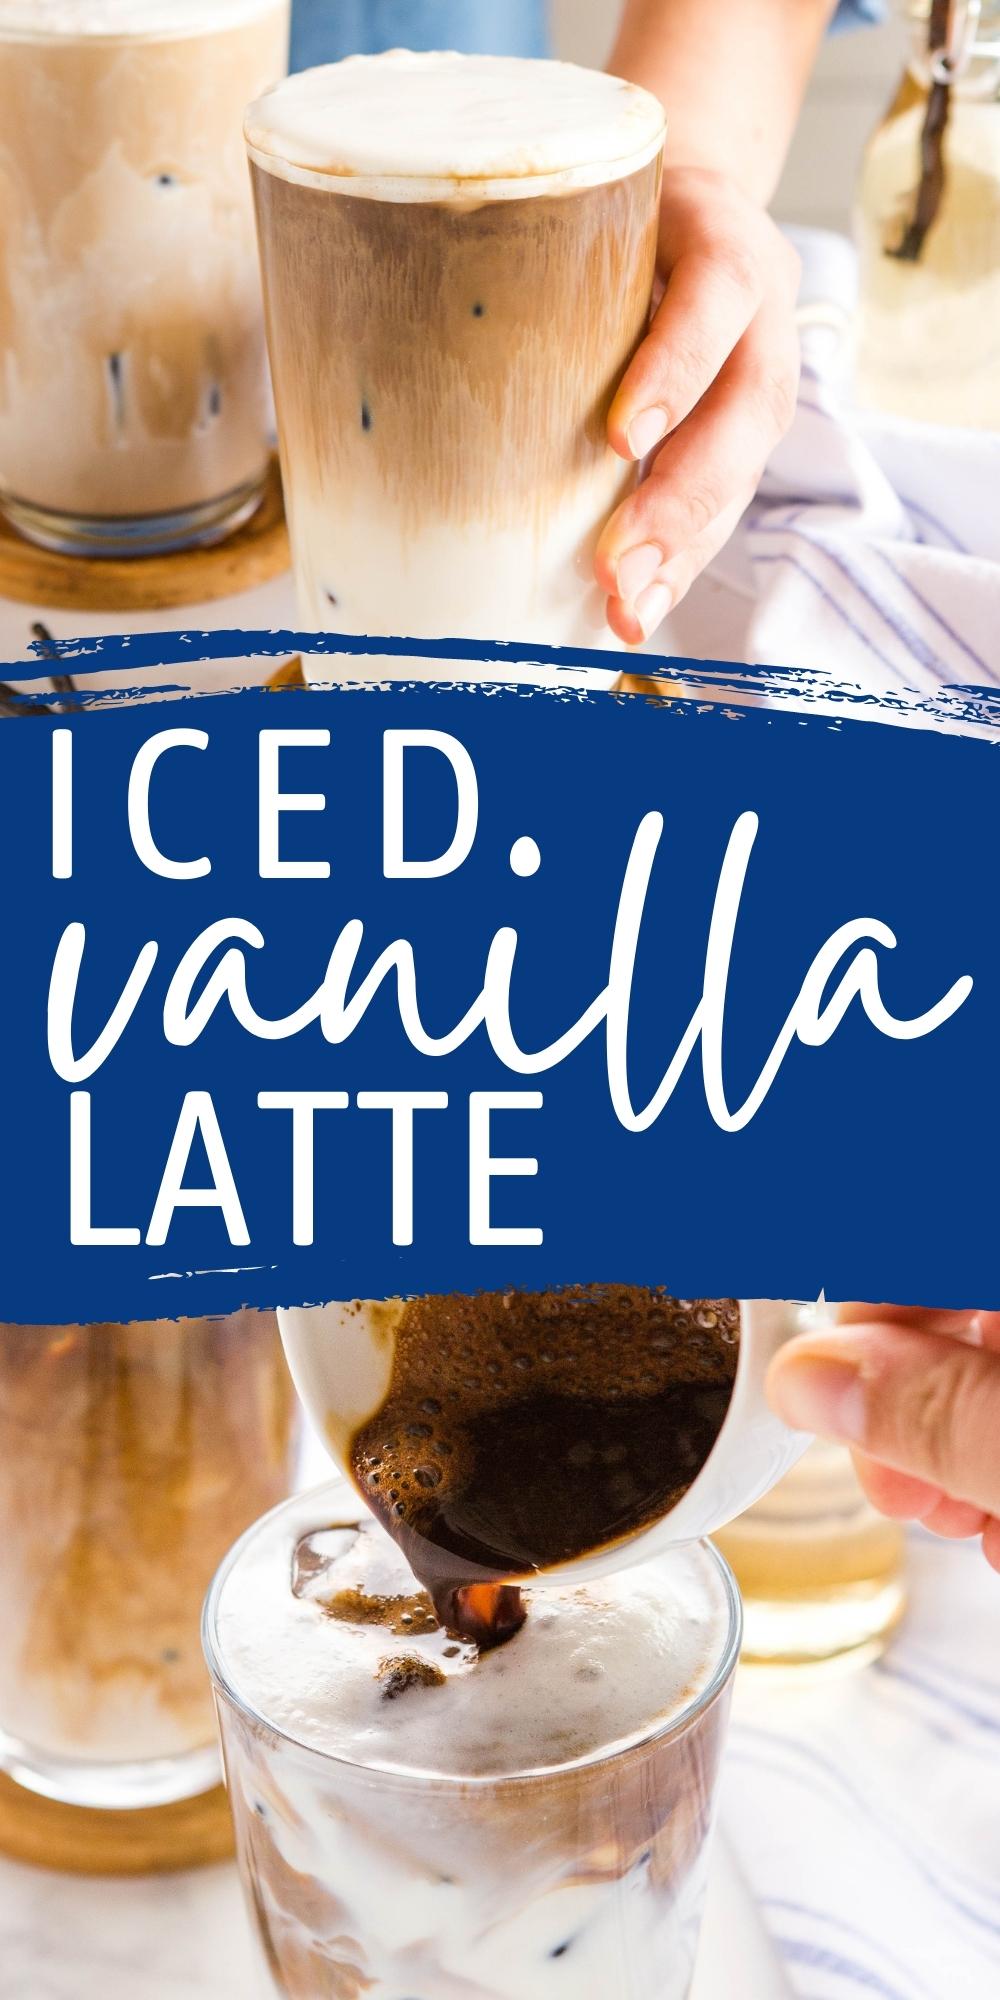 This Iced Vanilla Latte is the perfect refreshing coffee drink for coffee lovers! Simple espresso, easy syrup to sweeten, and foamed milk over ice! Easy to make dairy-free and sugar-free! Recipe from thebusybaker.ca! #icedvanillalatte #icedlattetutorial #homemade #coffee #coffeeshop #recipe via @busybakerblog